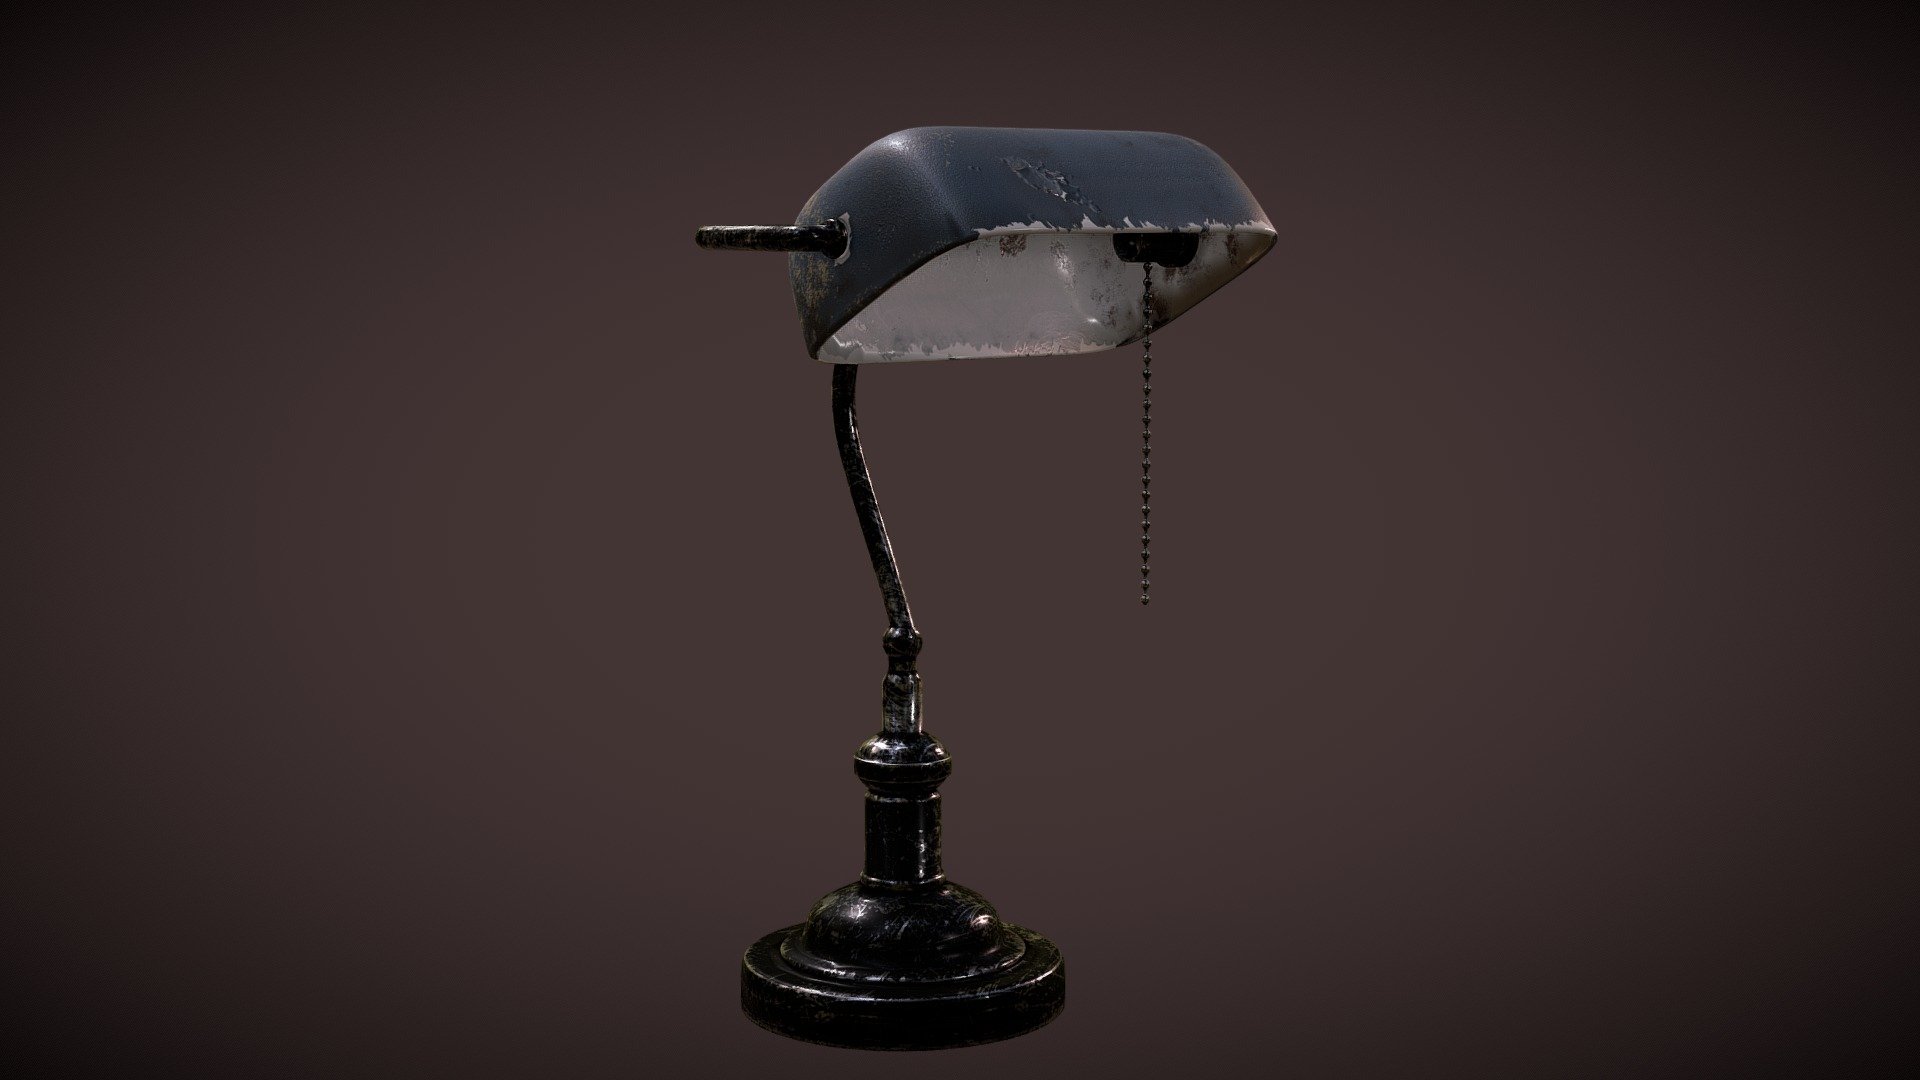 light fixture Lamp Vintage

Step into the past with our intricately designed 3D Vintage Luminaire, meticulously brought to life using Blender. This high-quality vintage light fixture captures the essence of a bygone era, adding a touch of nostalgia to your digital creations.

Compressed file includes 3 folders:

1: High Poly

2: Low Poly

3: Texture

Note: Low Poly available in blend file format with applied textures.

Comes with 3 file formats for each type:

LOW POLY (Low-Resolution Model with Applied Textures) :

1: Blend File : A Blender project file containing the low-resolution 3D model with applied textures.

2: OBJ File : A 3D model file format.

3: FBX File : A versatile file format used for 3D model exchange between different software applications.

HIGH POLY (High-Resolution Model):

1: Blend File : A Blender project file containing the low-resolution 3D model with applied textures.

2: OBJ File: A 3D model file format 3d model